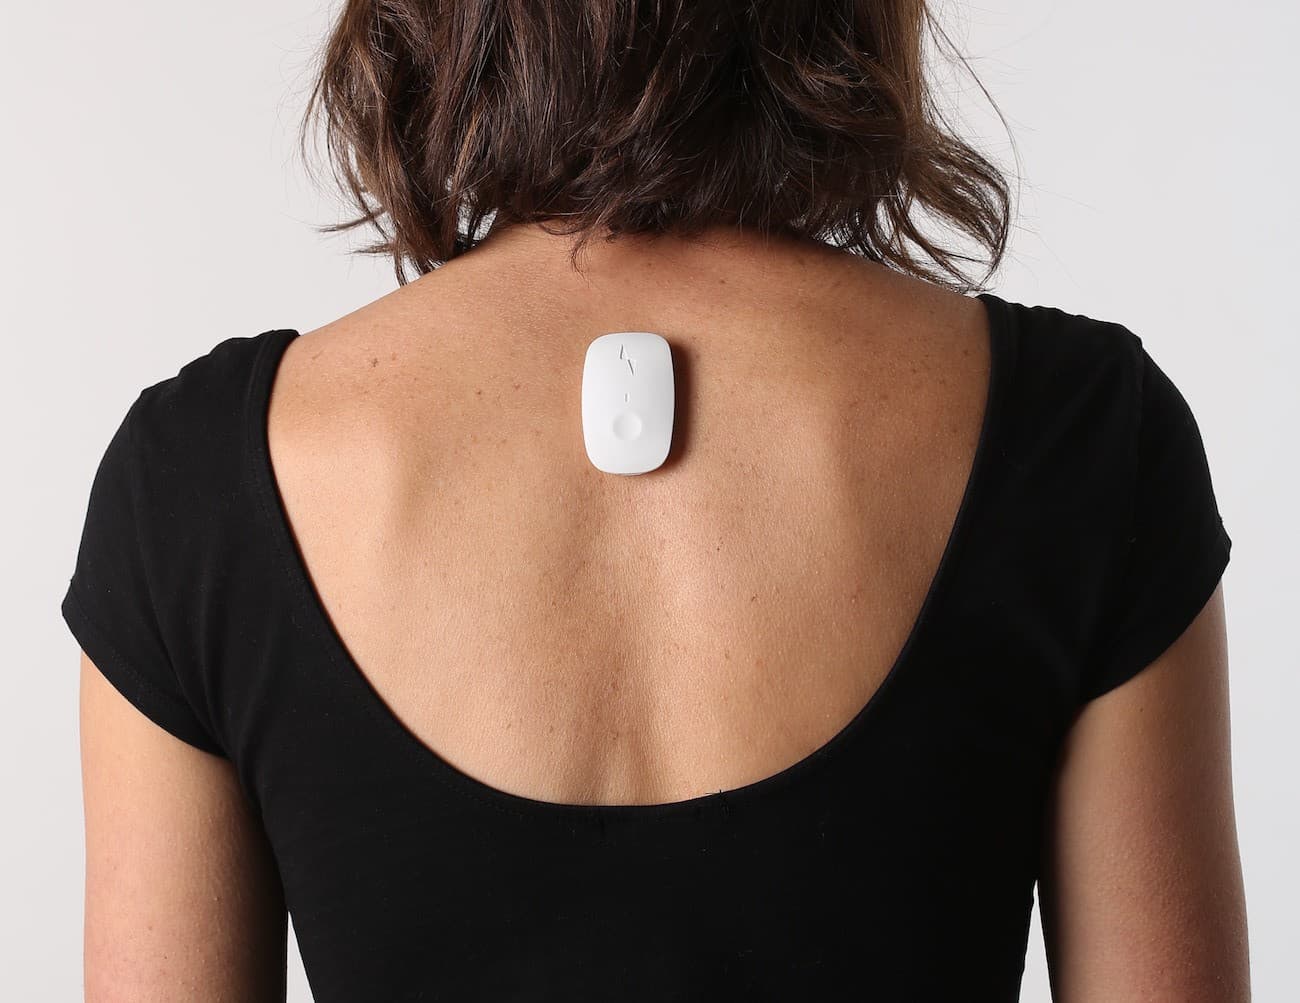 How Posture Correction Devices Use Technology to Deliver Pain Relief